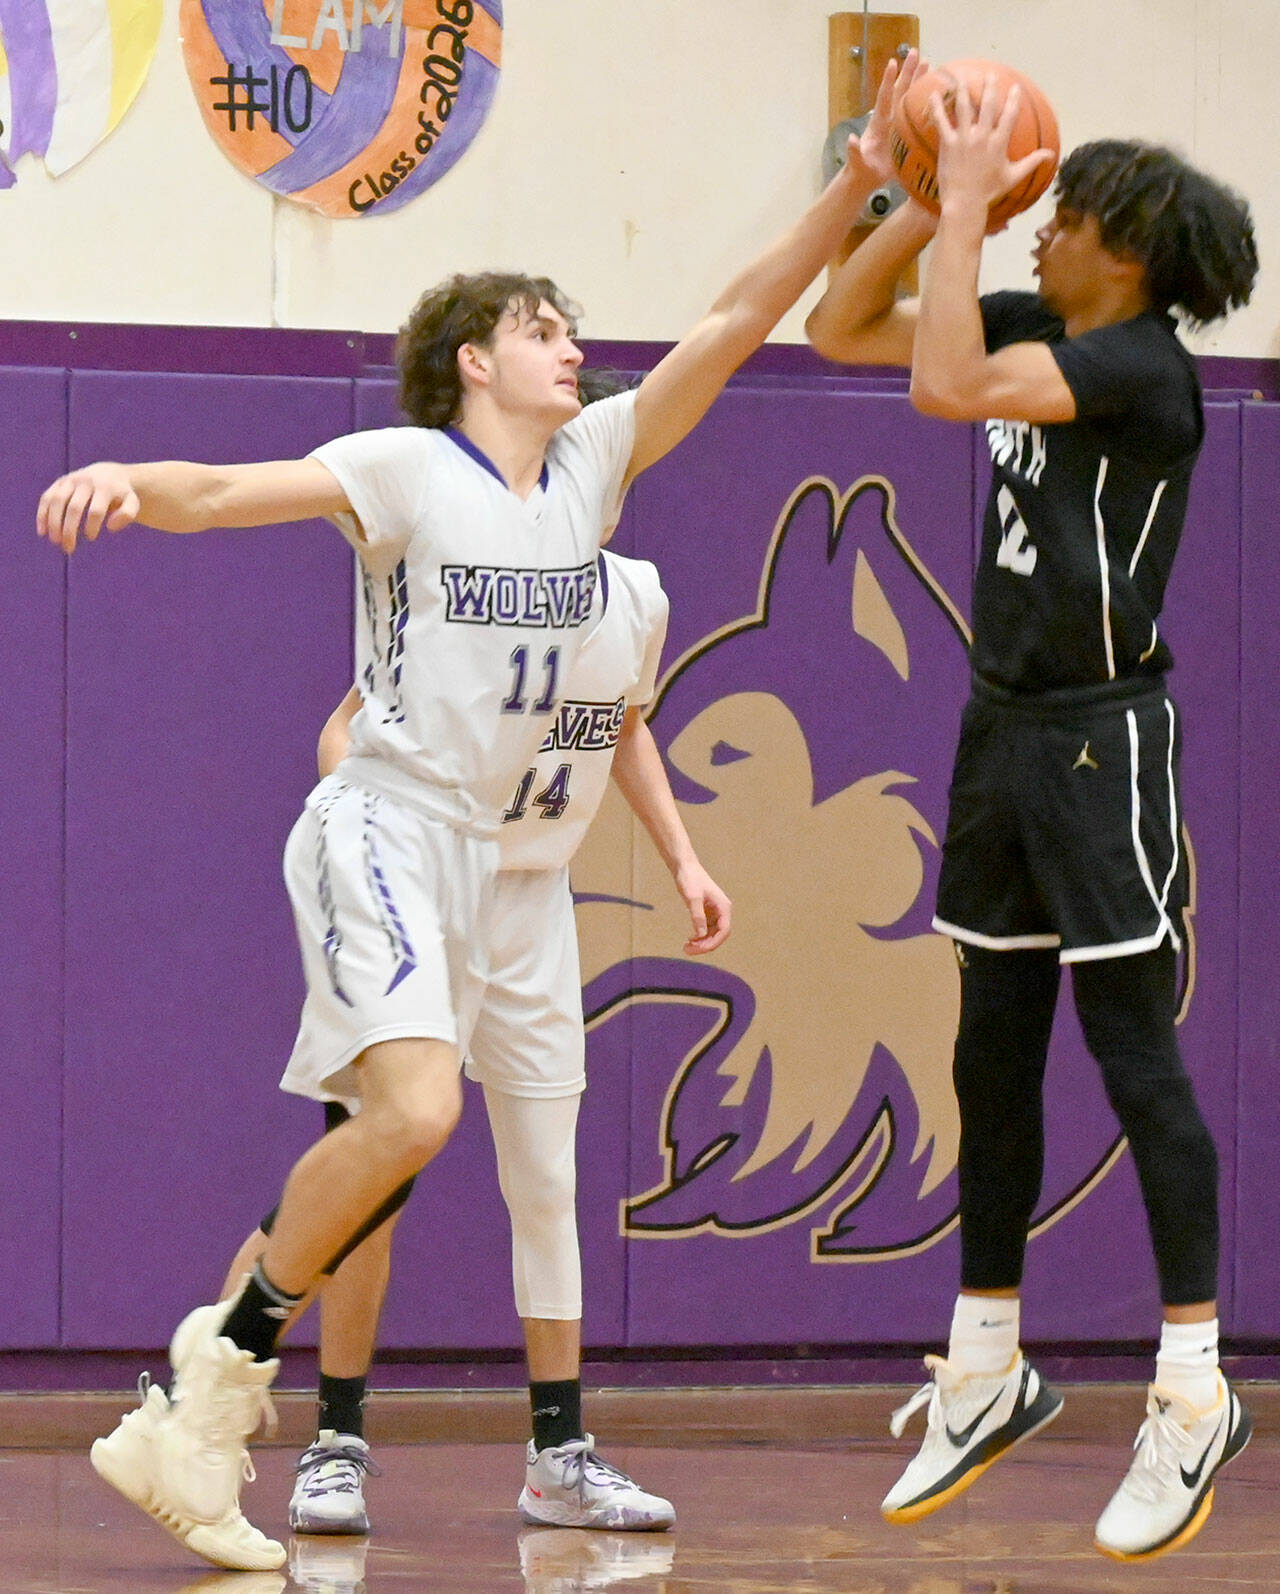 Sequim’s Charlie Grider gets his hands in the face of a jump shot taken by North Kitsap’s Harry Davies on Monday at Sequim High School. (Michael Dashiell/Olympic Peninsula News Group)